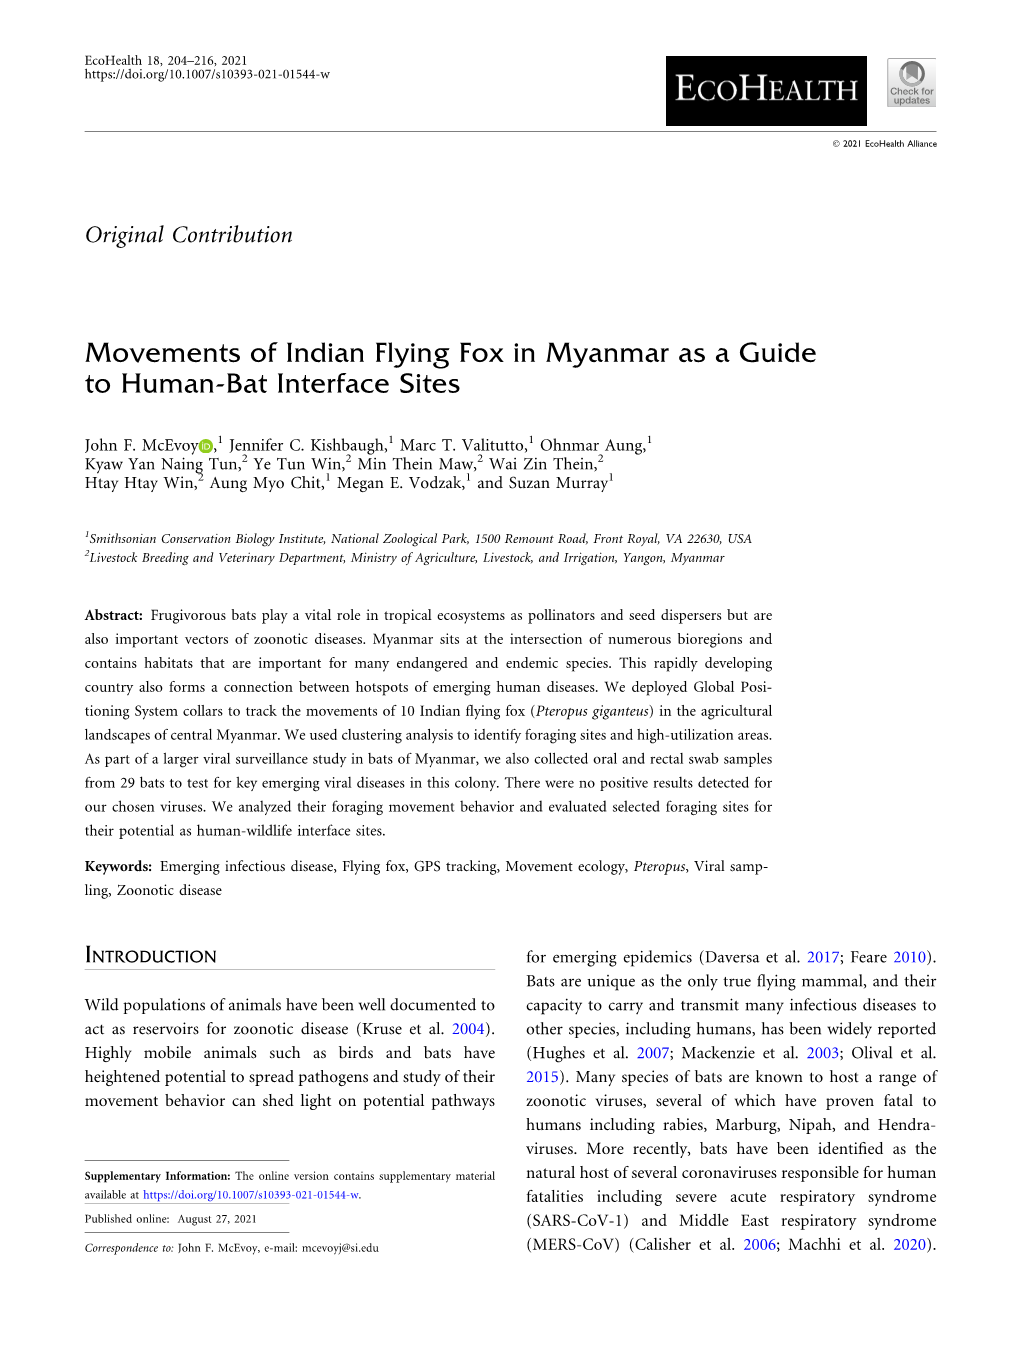 Movements of Indian Flying Fox in Myanmar As a Guide to Human-Bat Interface Sites